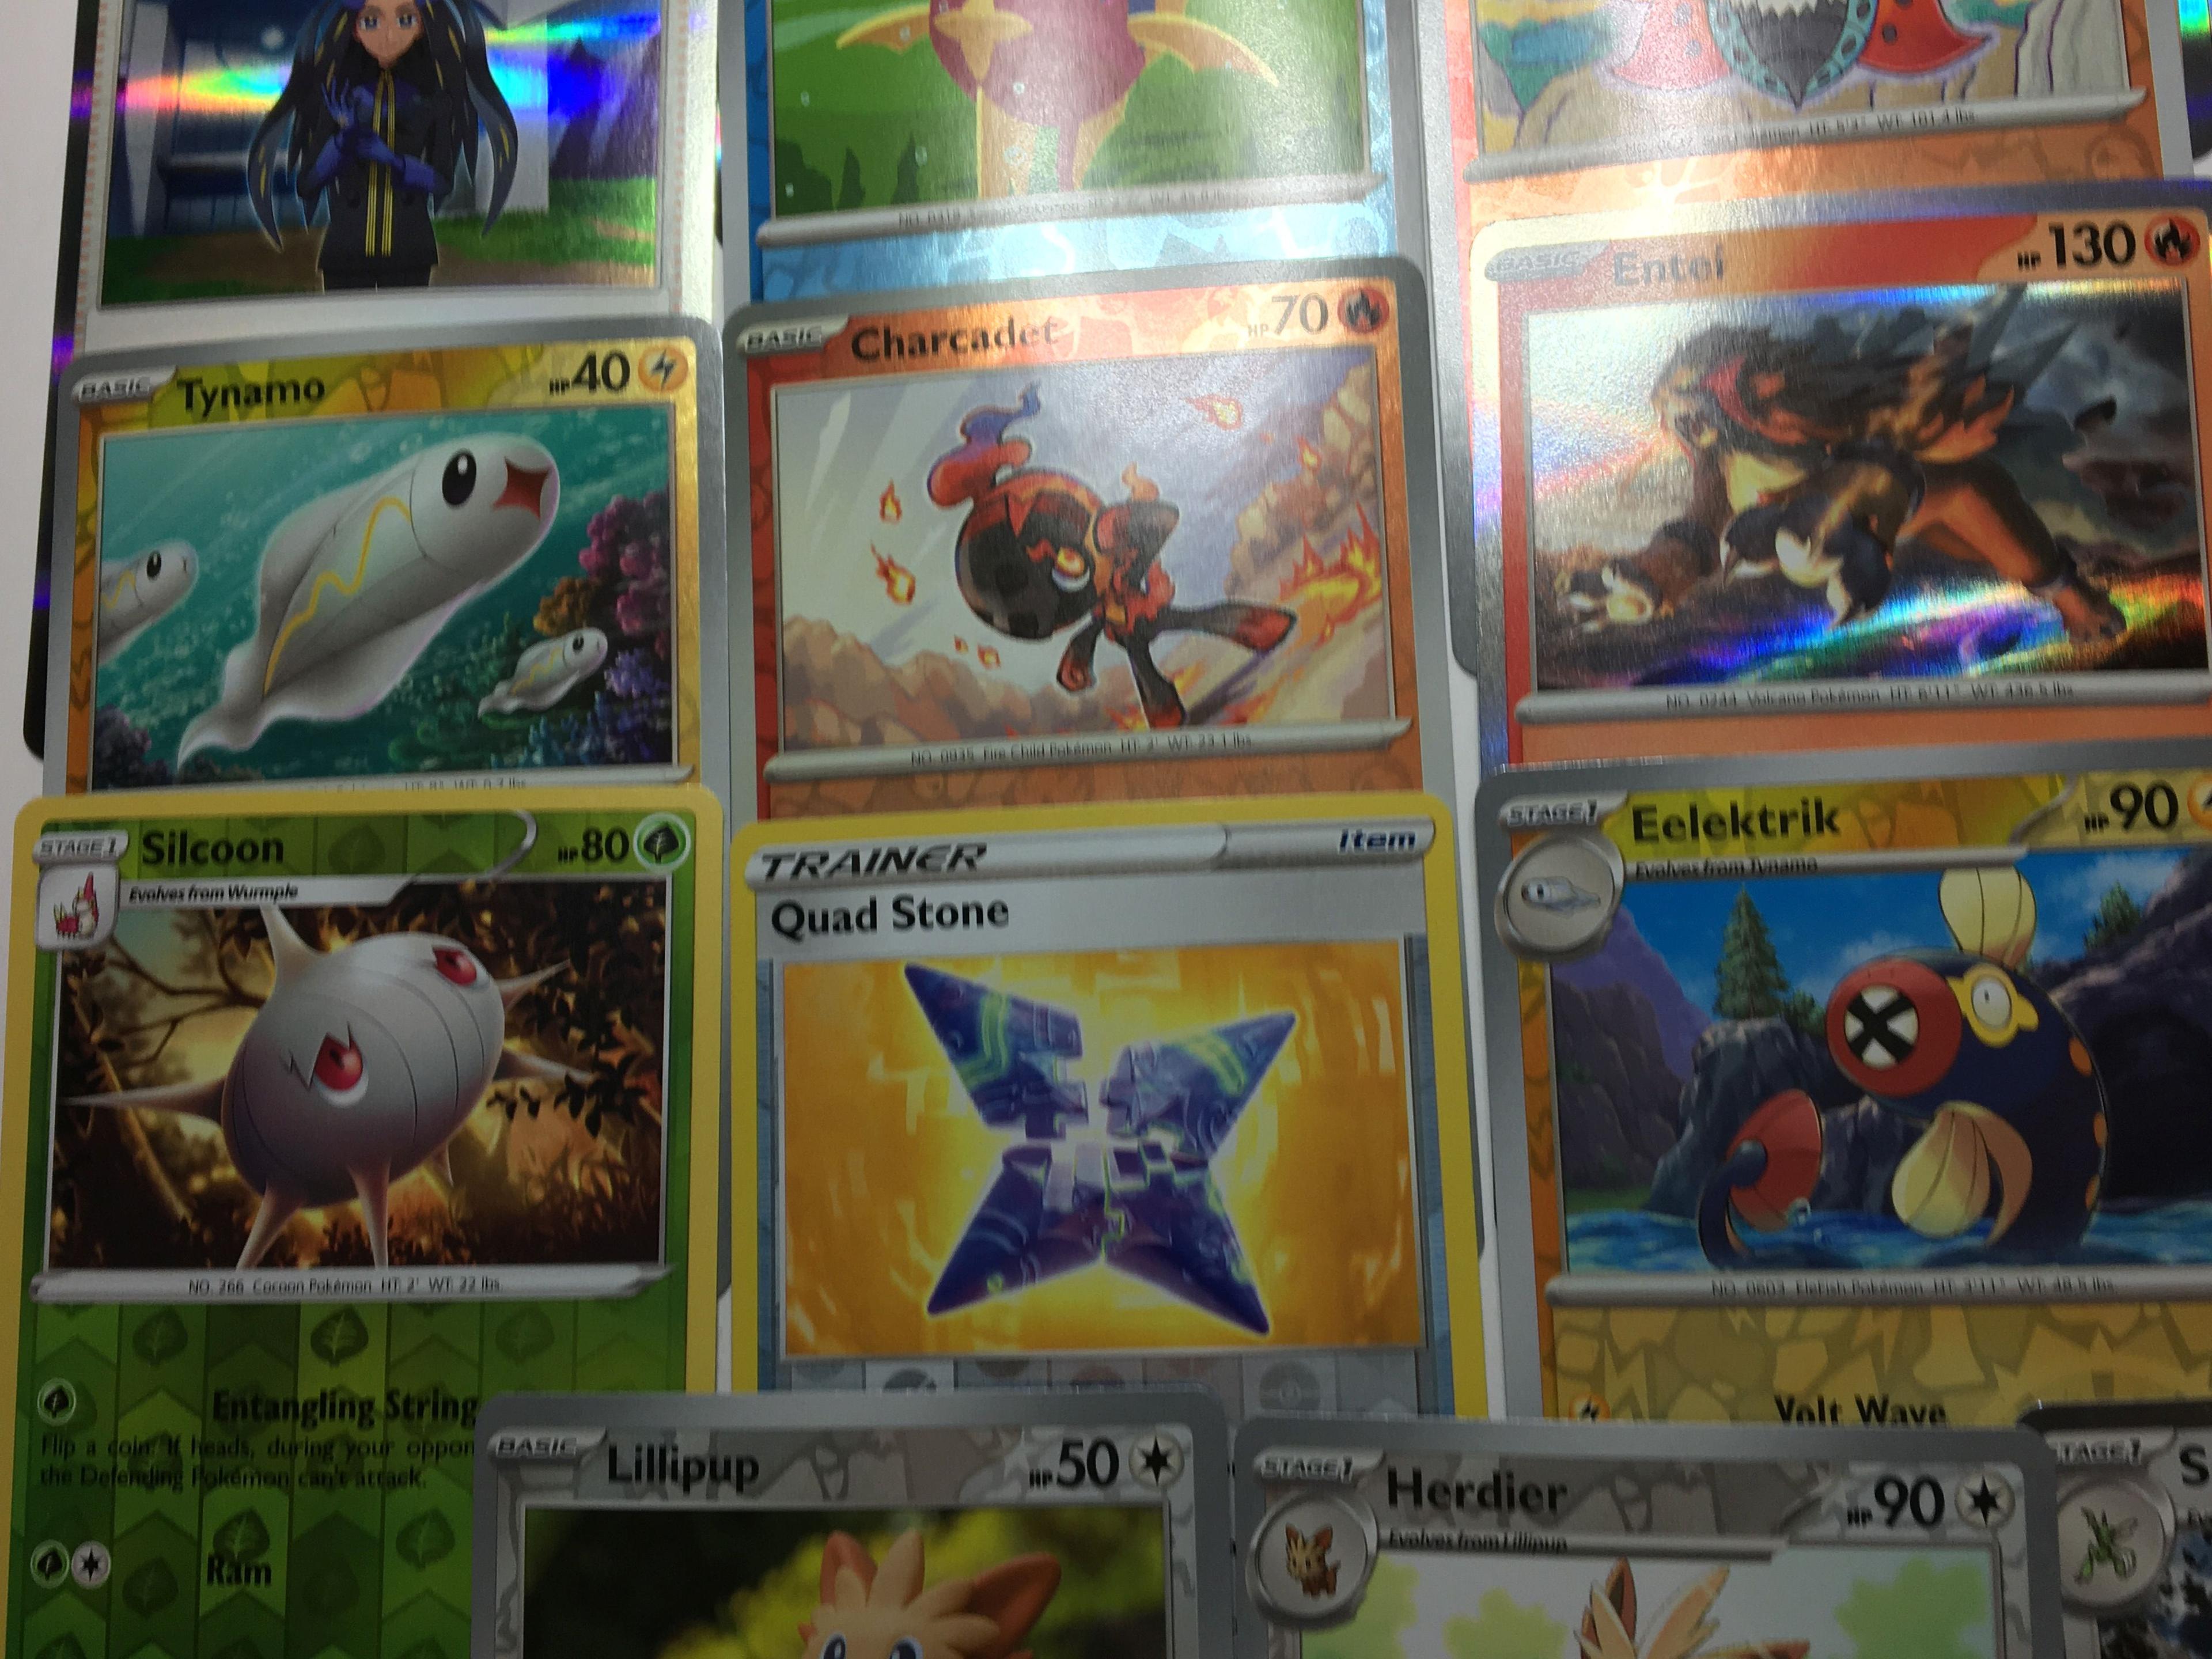 Pokemon Card Lot Of 23 Cards All Pack Fresh Holos Lots Of Rare Better Cards